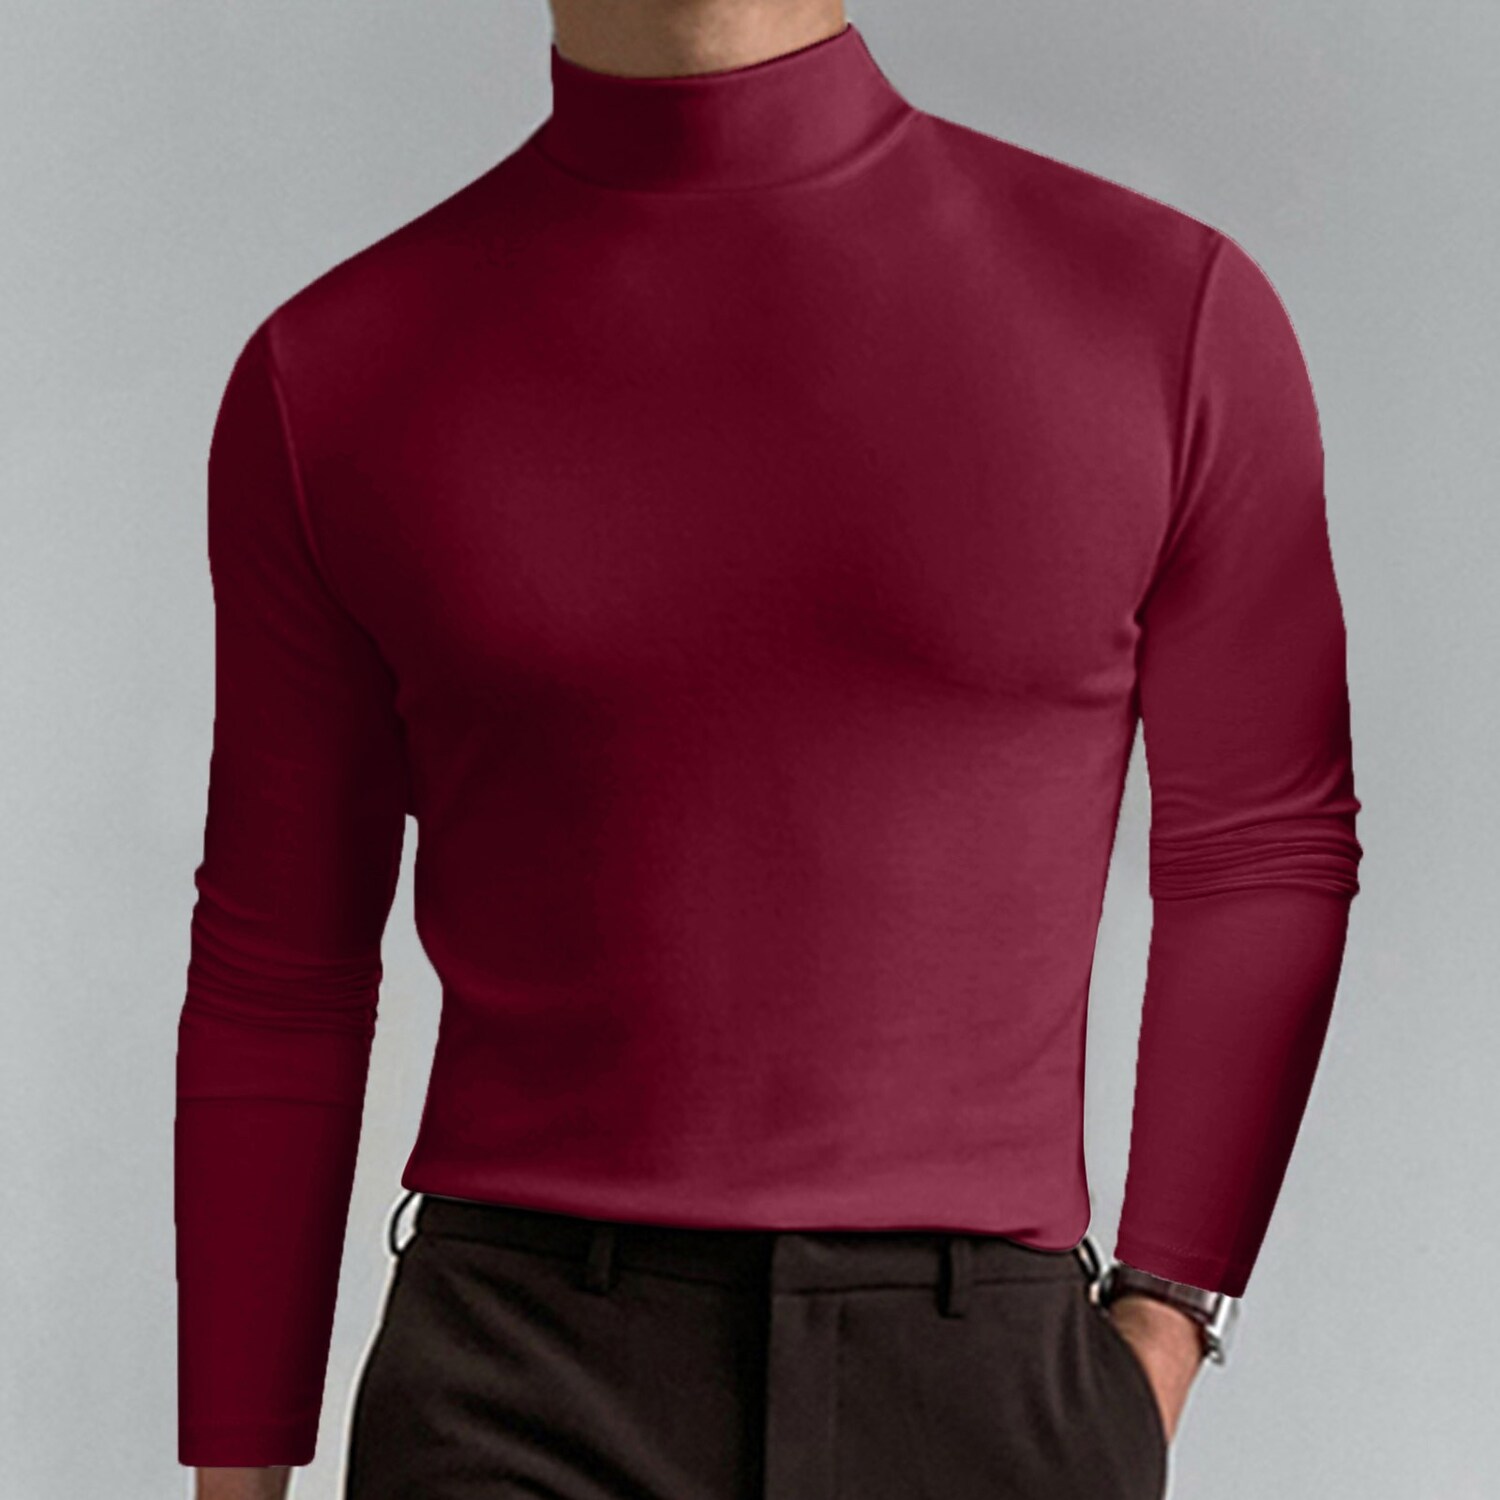 Male Casual Shirt Long Sleeve Shirt Plain / Solid Turtleneck non-printing Home Wear Long Sleeve Leisure Top